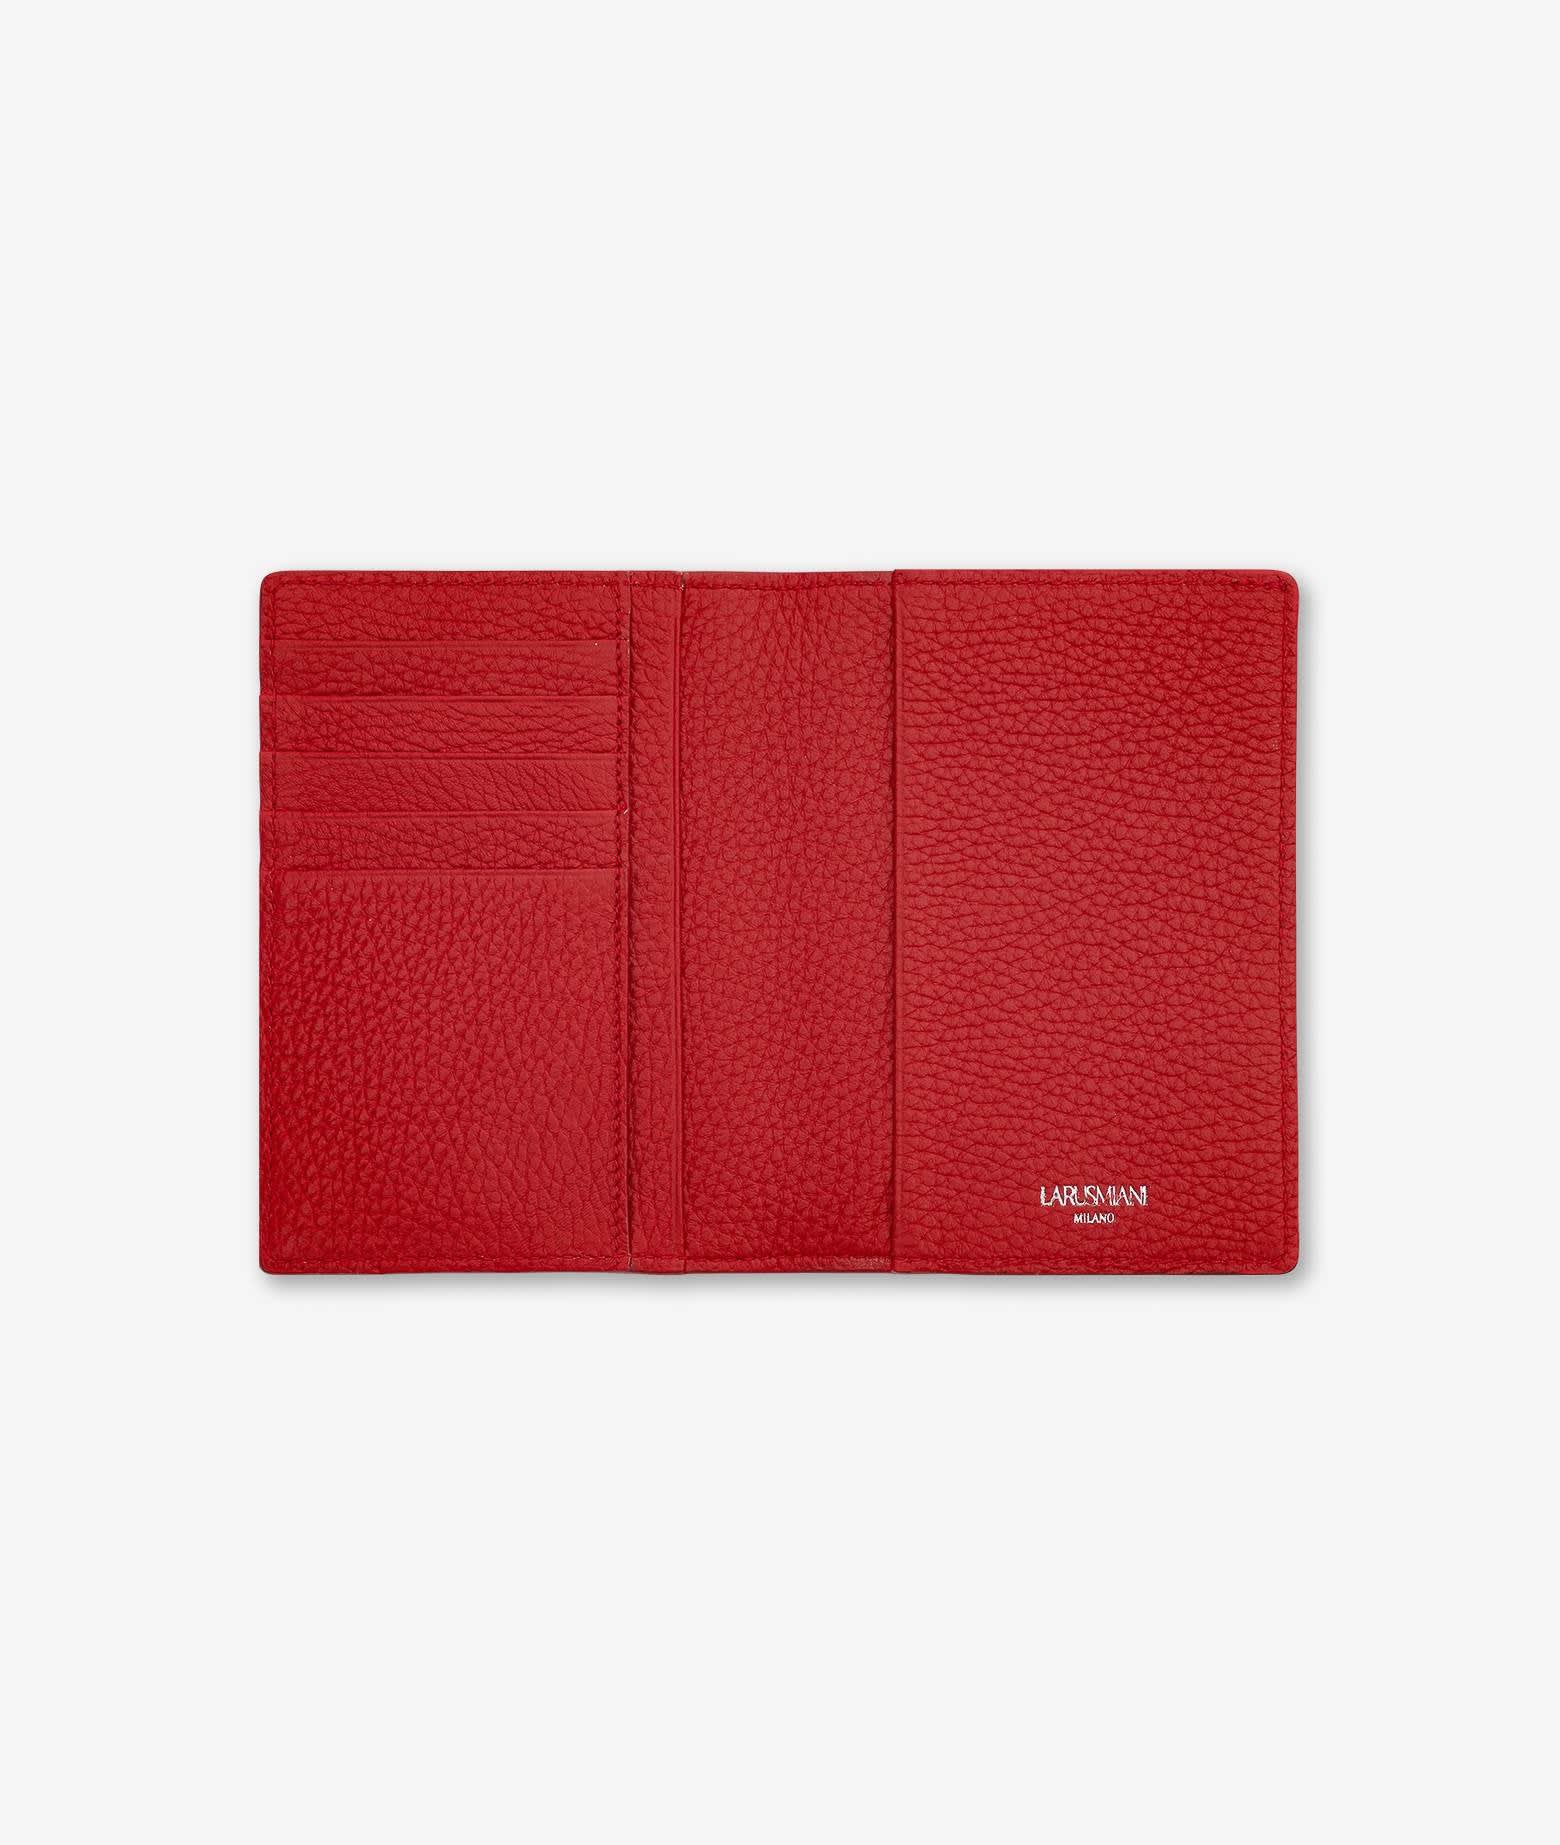 Shop Larusmiani Passport Cover Fiumicino Wallet In Red